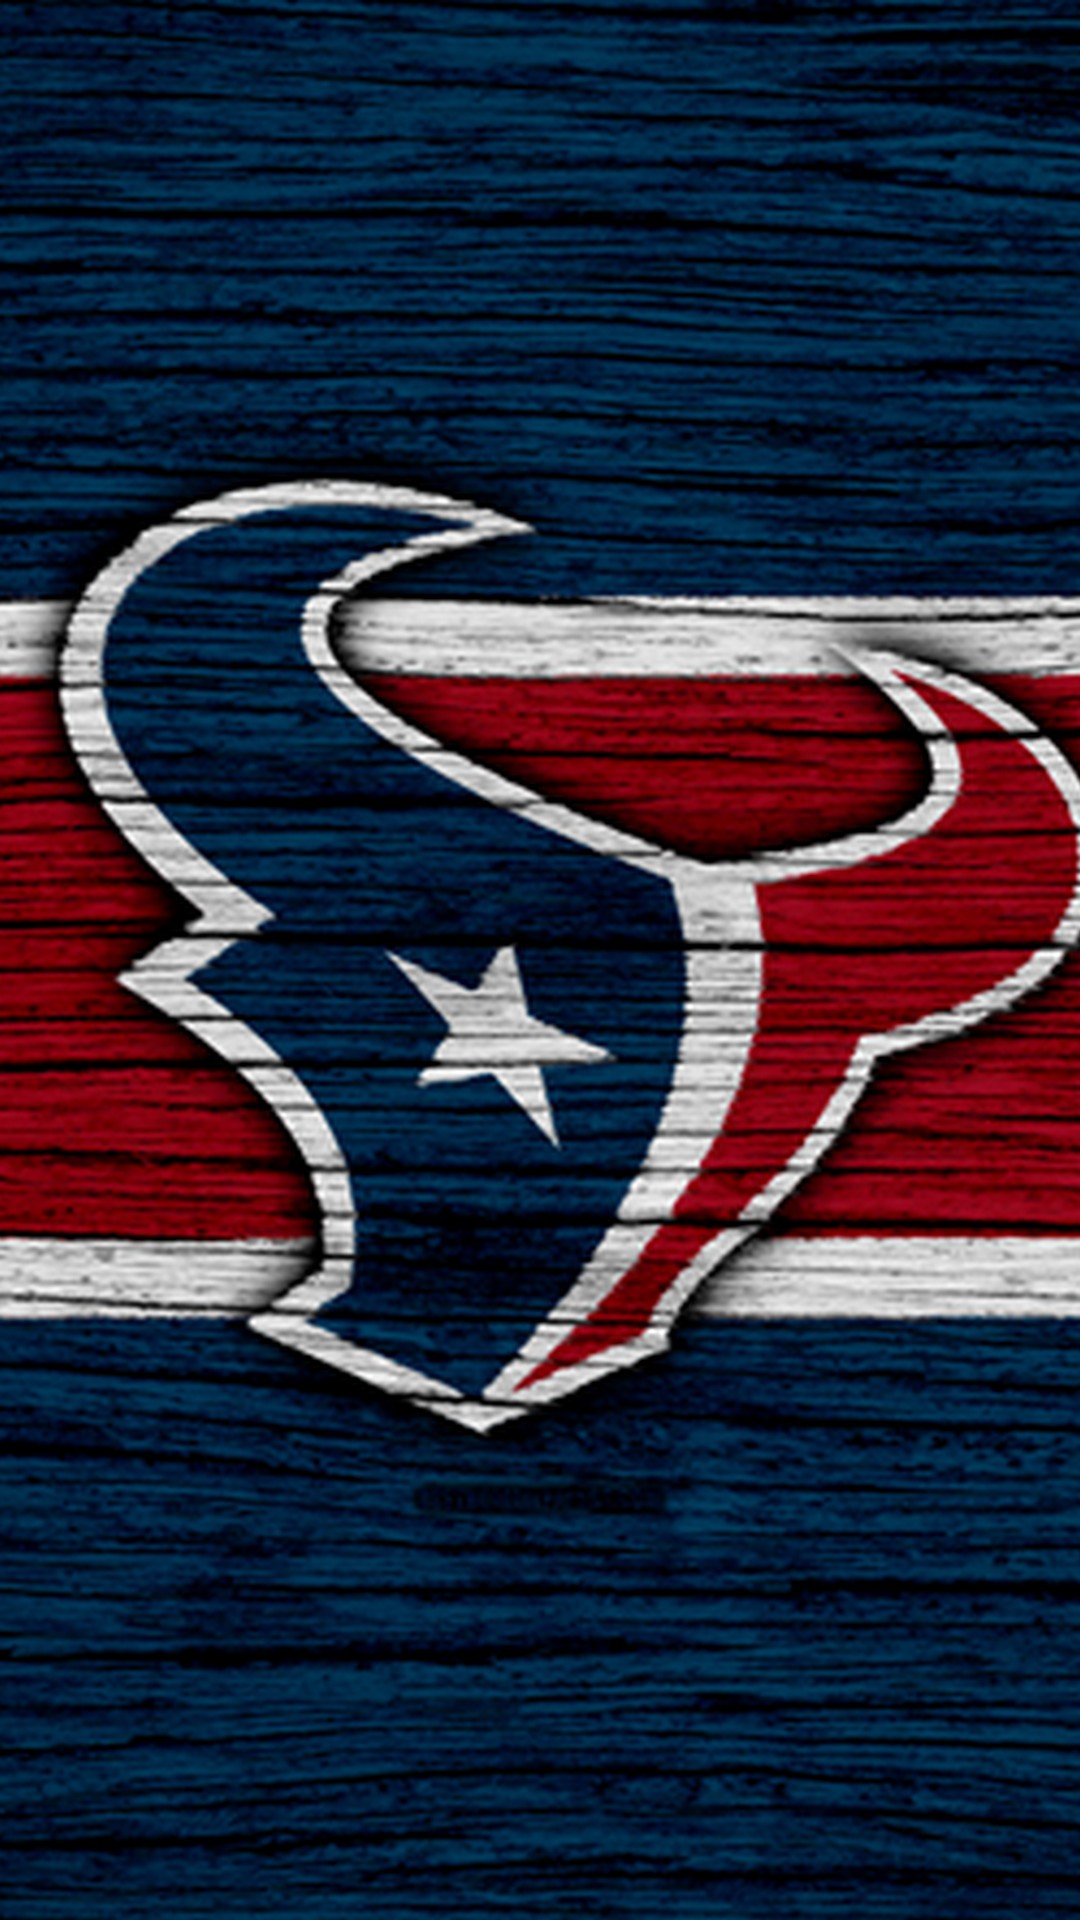 Houston Texans iPhone Wallpaper HD with high-resolution 1080x1920 pixel. Download and set as wallpaper for Apple iPhone X, XS Max, XR, 8, 7, 6, SE, iPad, Android